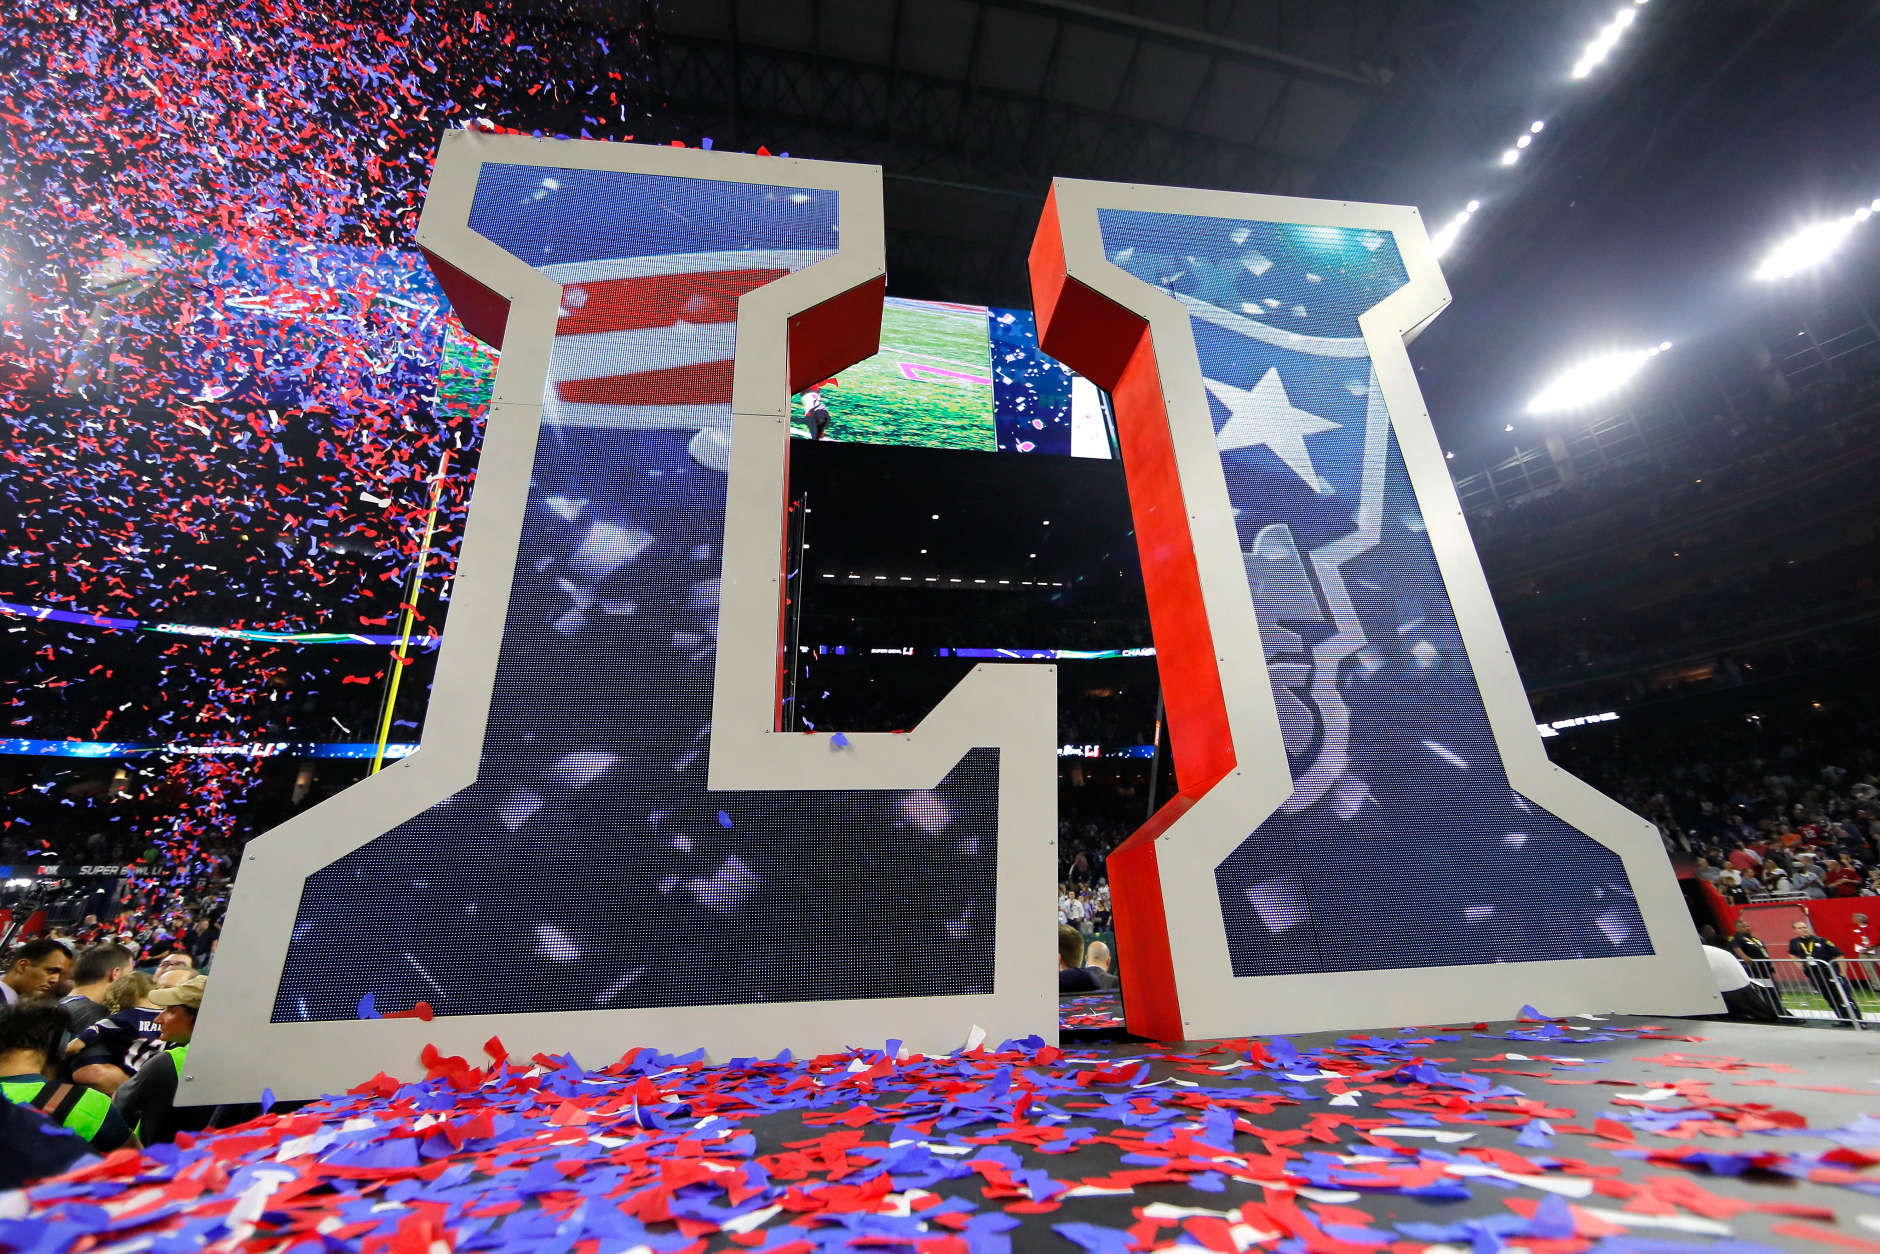 HOUSTON, TX - FEBRUARY 05:  Confetti falls after the New England Patriots defeated the Atlanta Falcons 34-28 during Super Bowl 51 at NRG Stadium on February 5, 2017 in Houston, Texas.  (Photo by Kevin C. Cox/Getty Images)